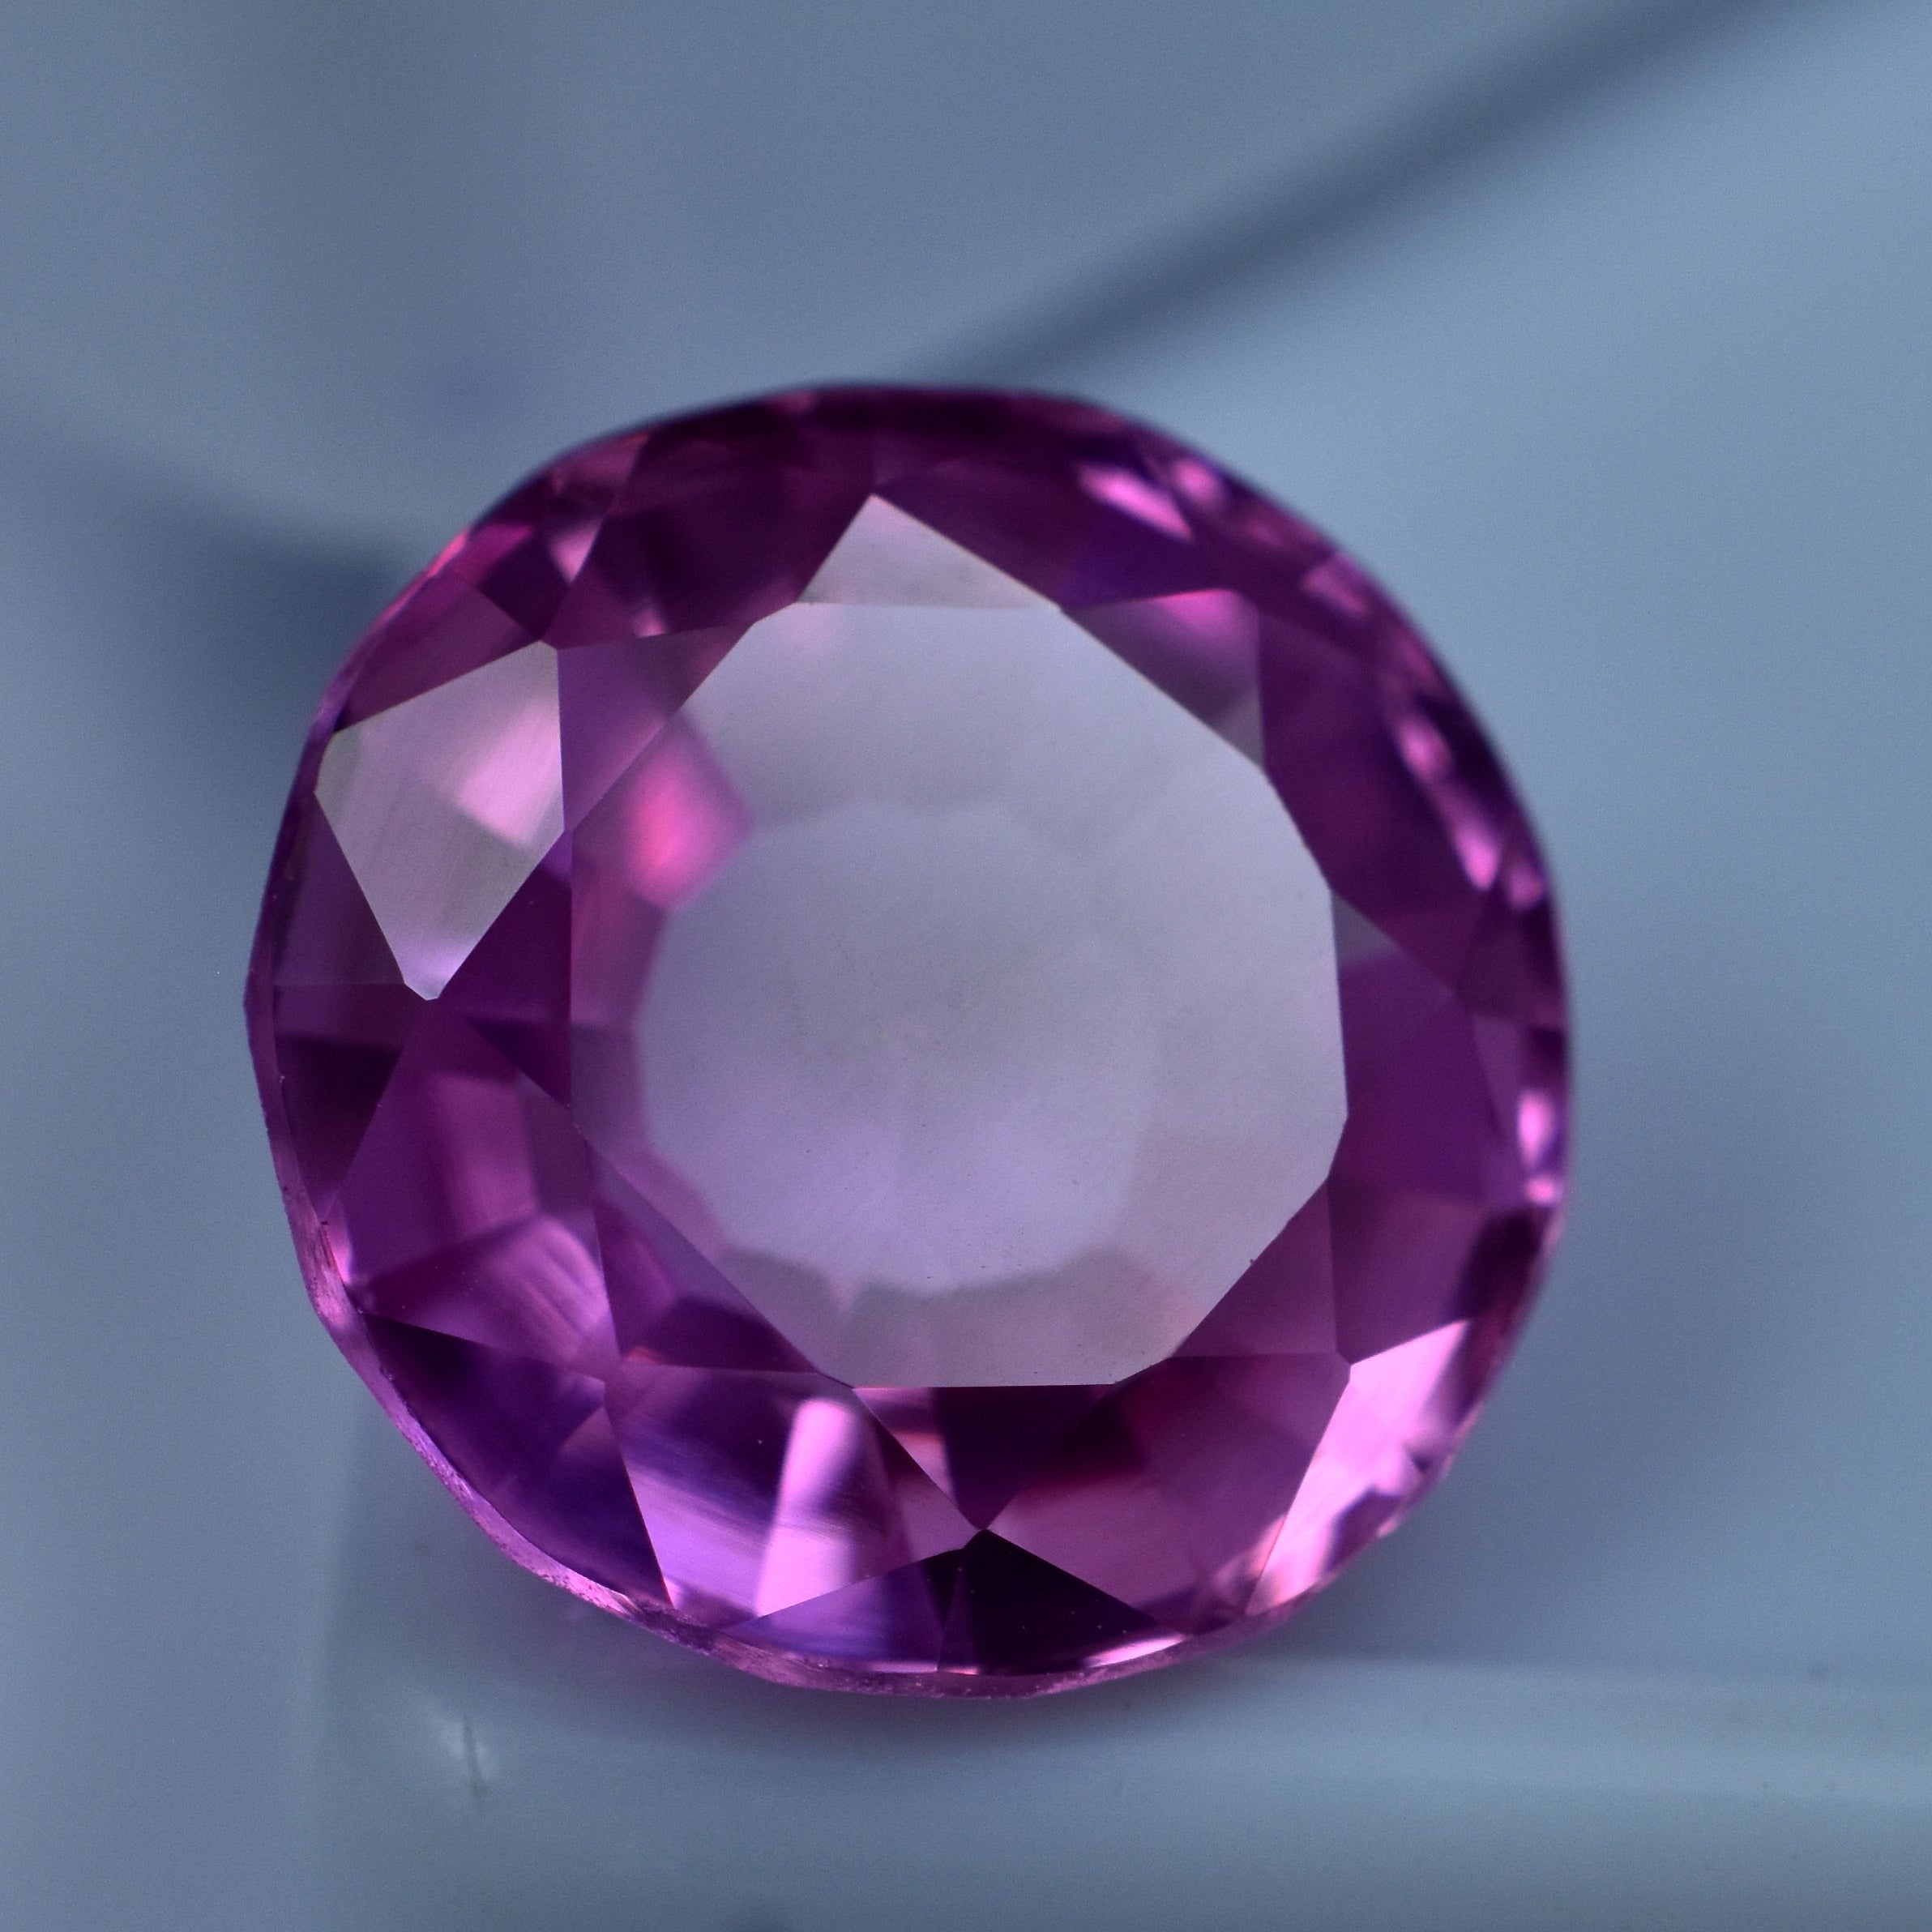 9.33 Carat Round Cut Pink Ruby Certified Loose Gemstone Best For Ring/Pendent Making Natural Pink Ruby gemstone